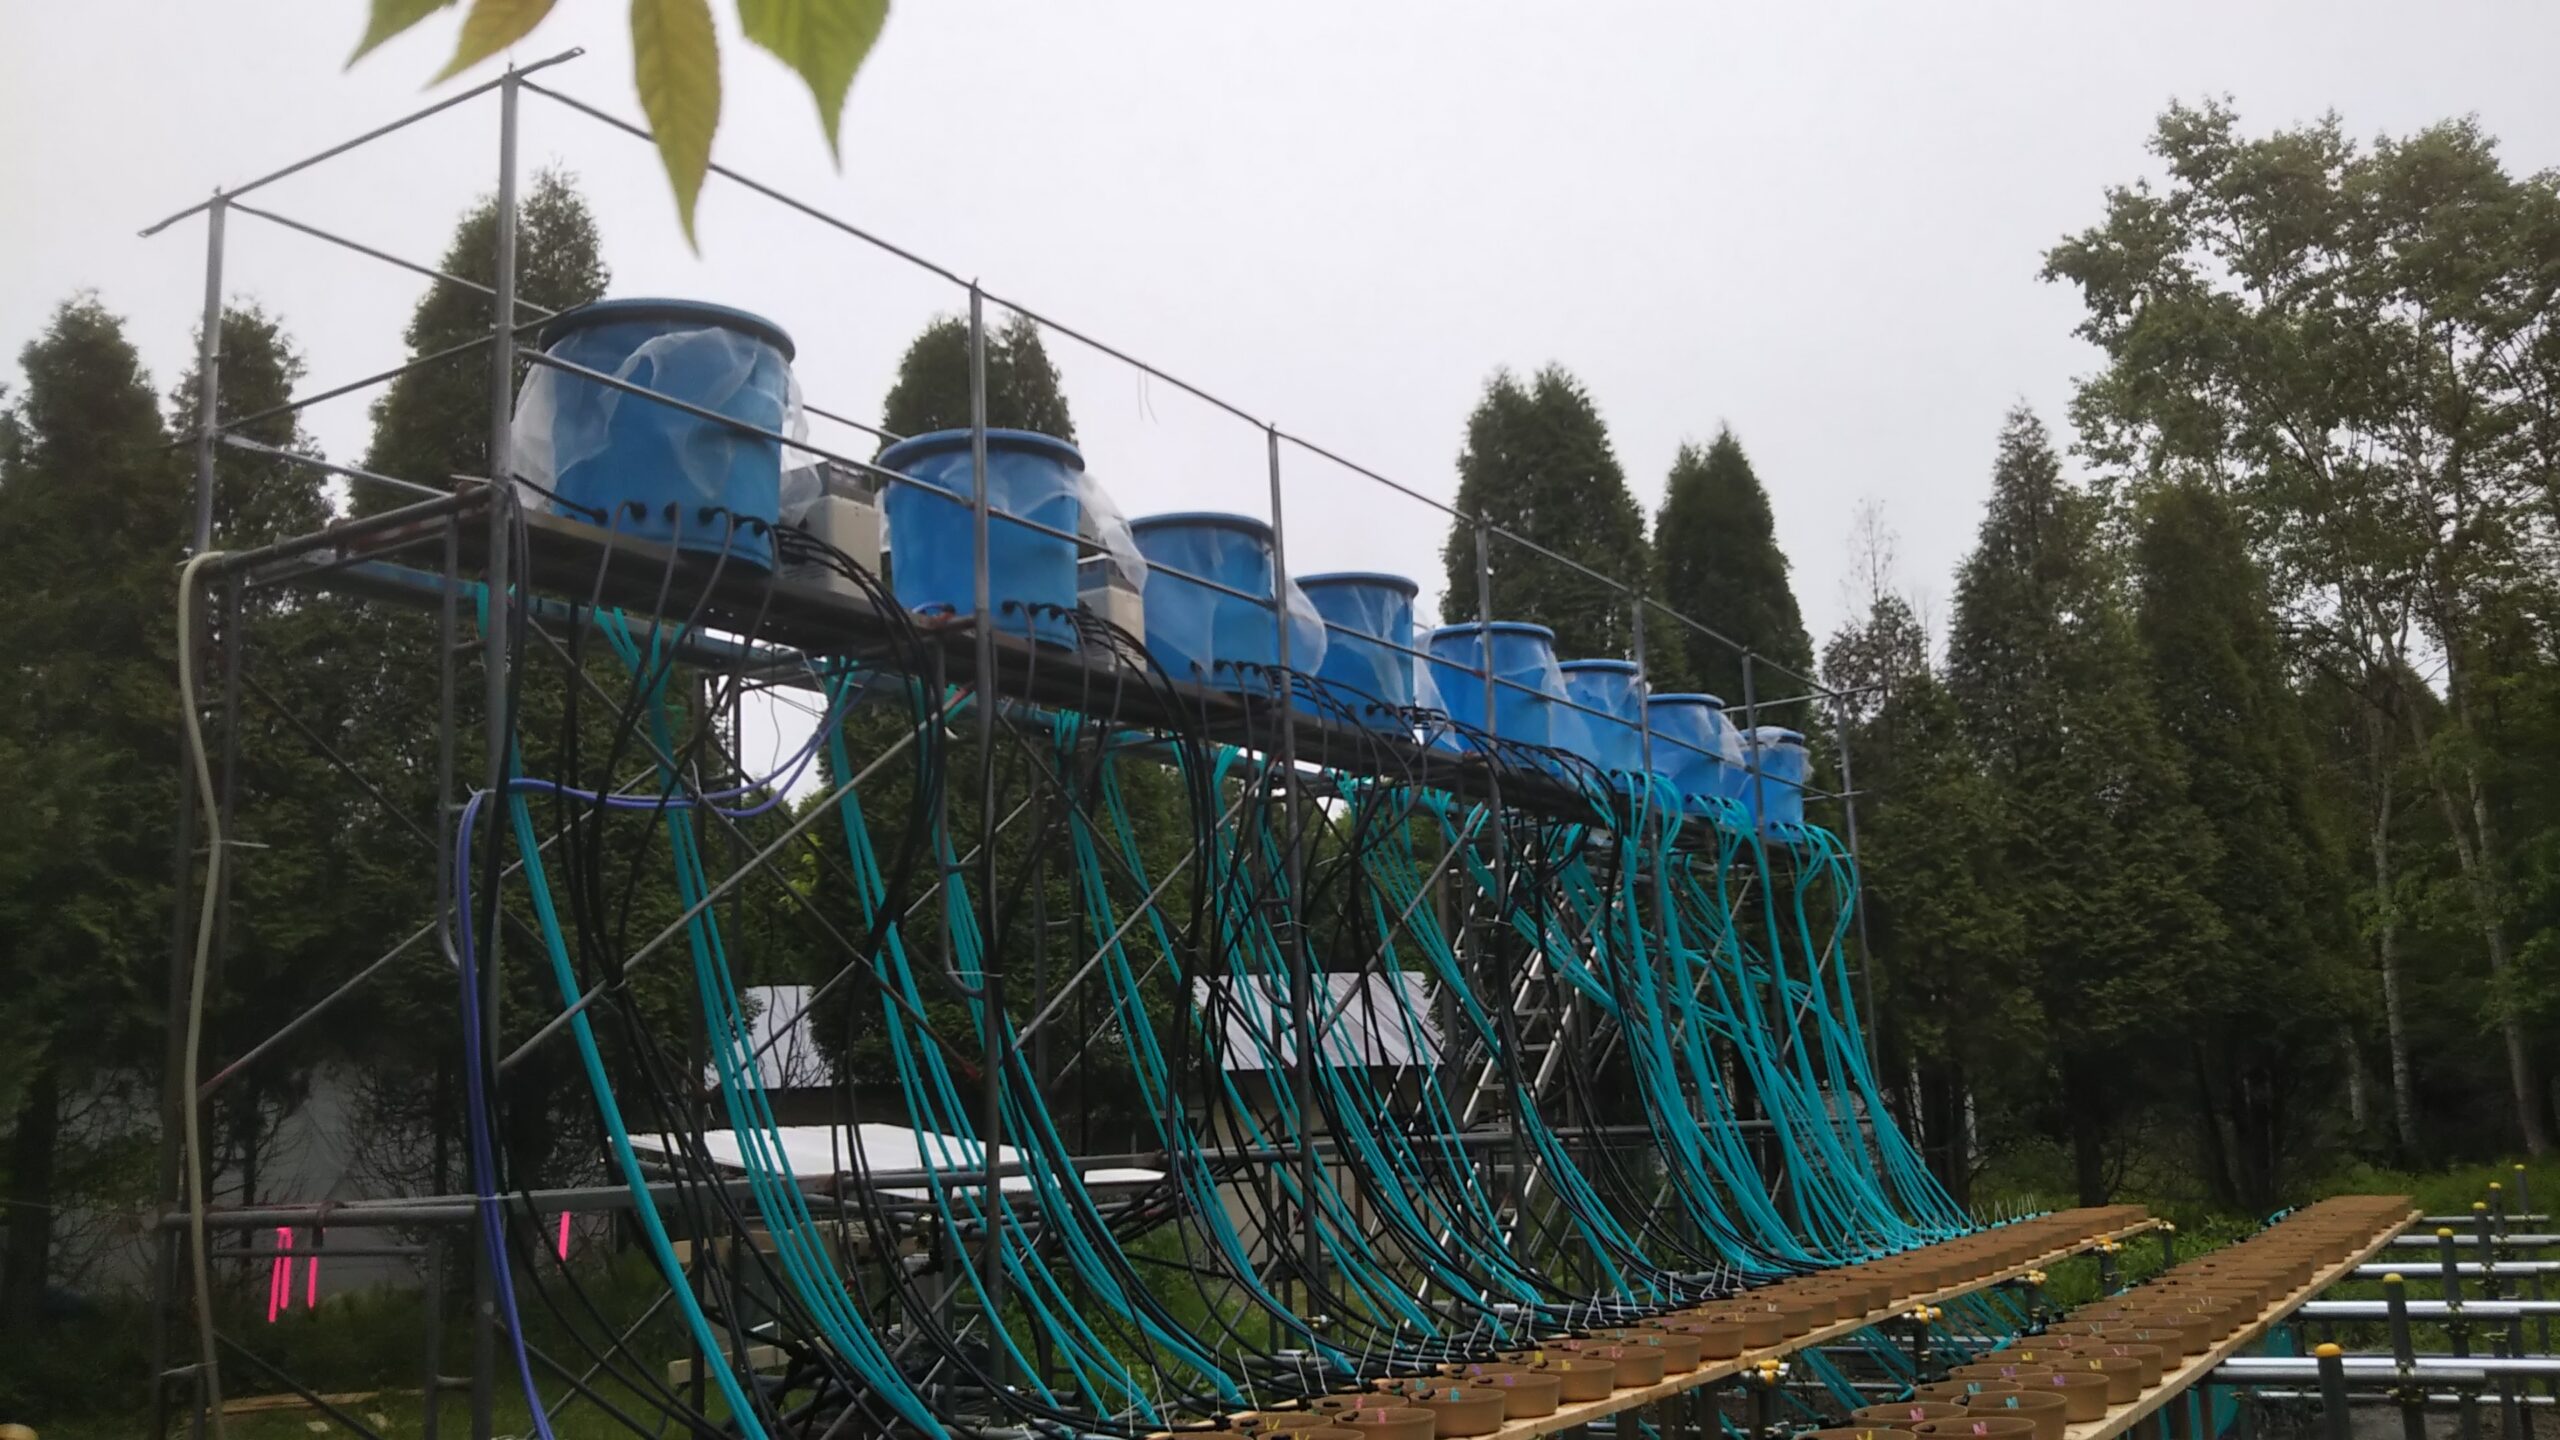 Outdoor experimental set up at the Tomakomai Experimental Forest (Photo by Samuel Ross)